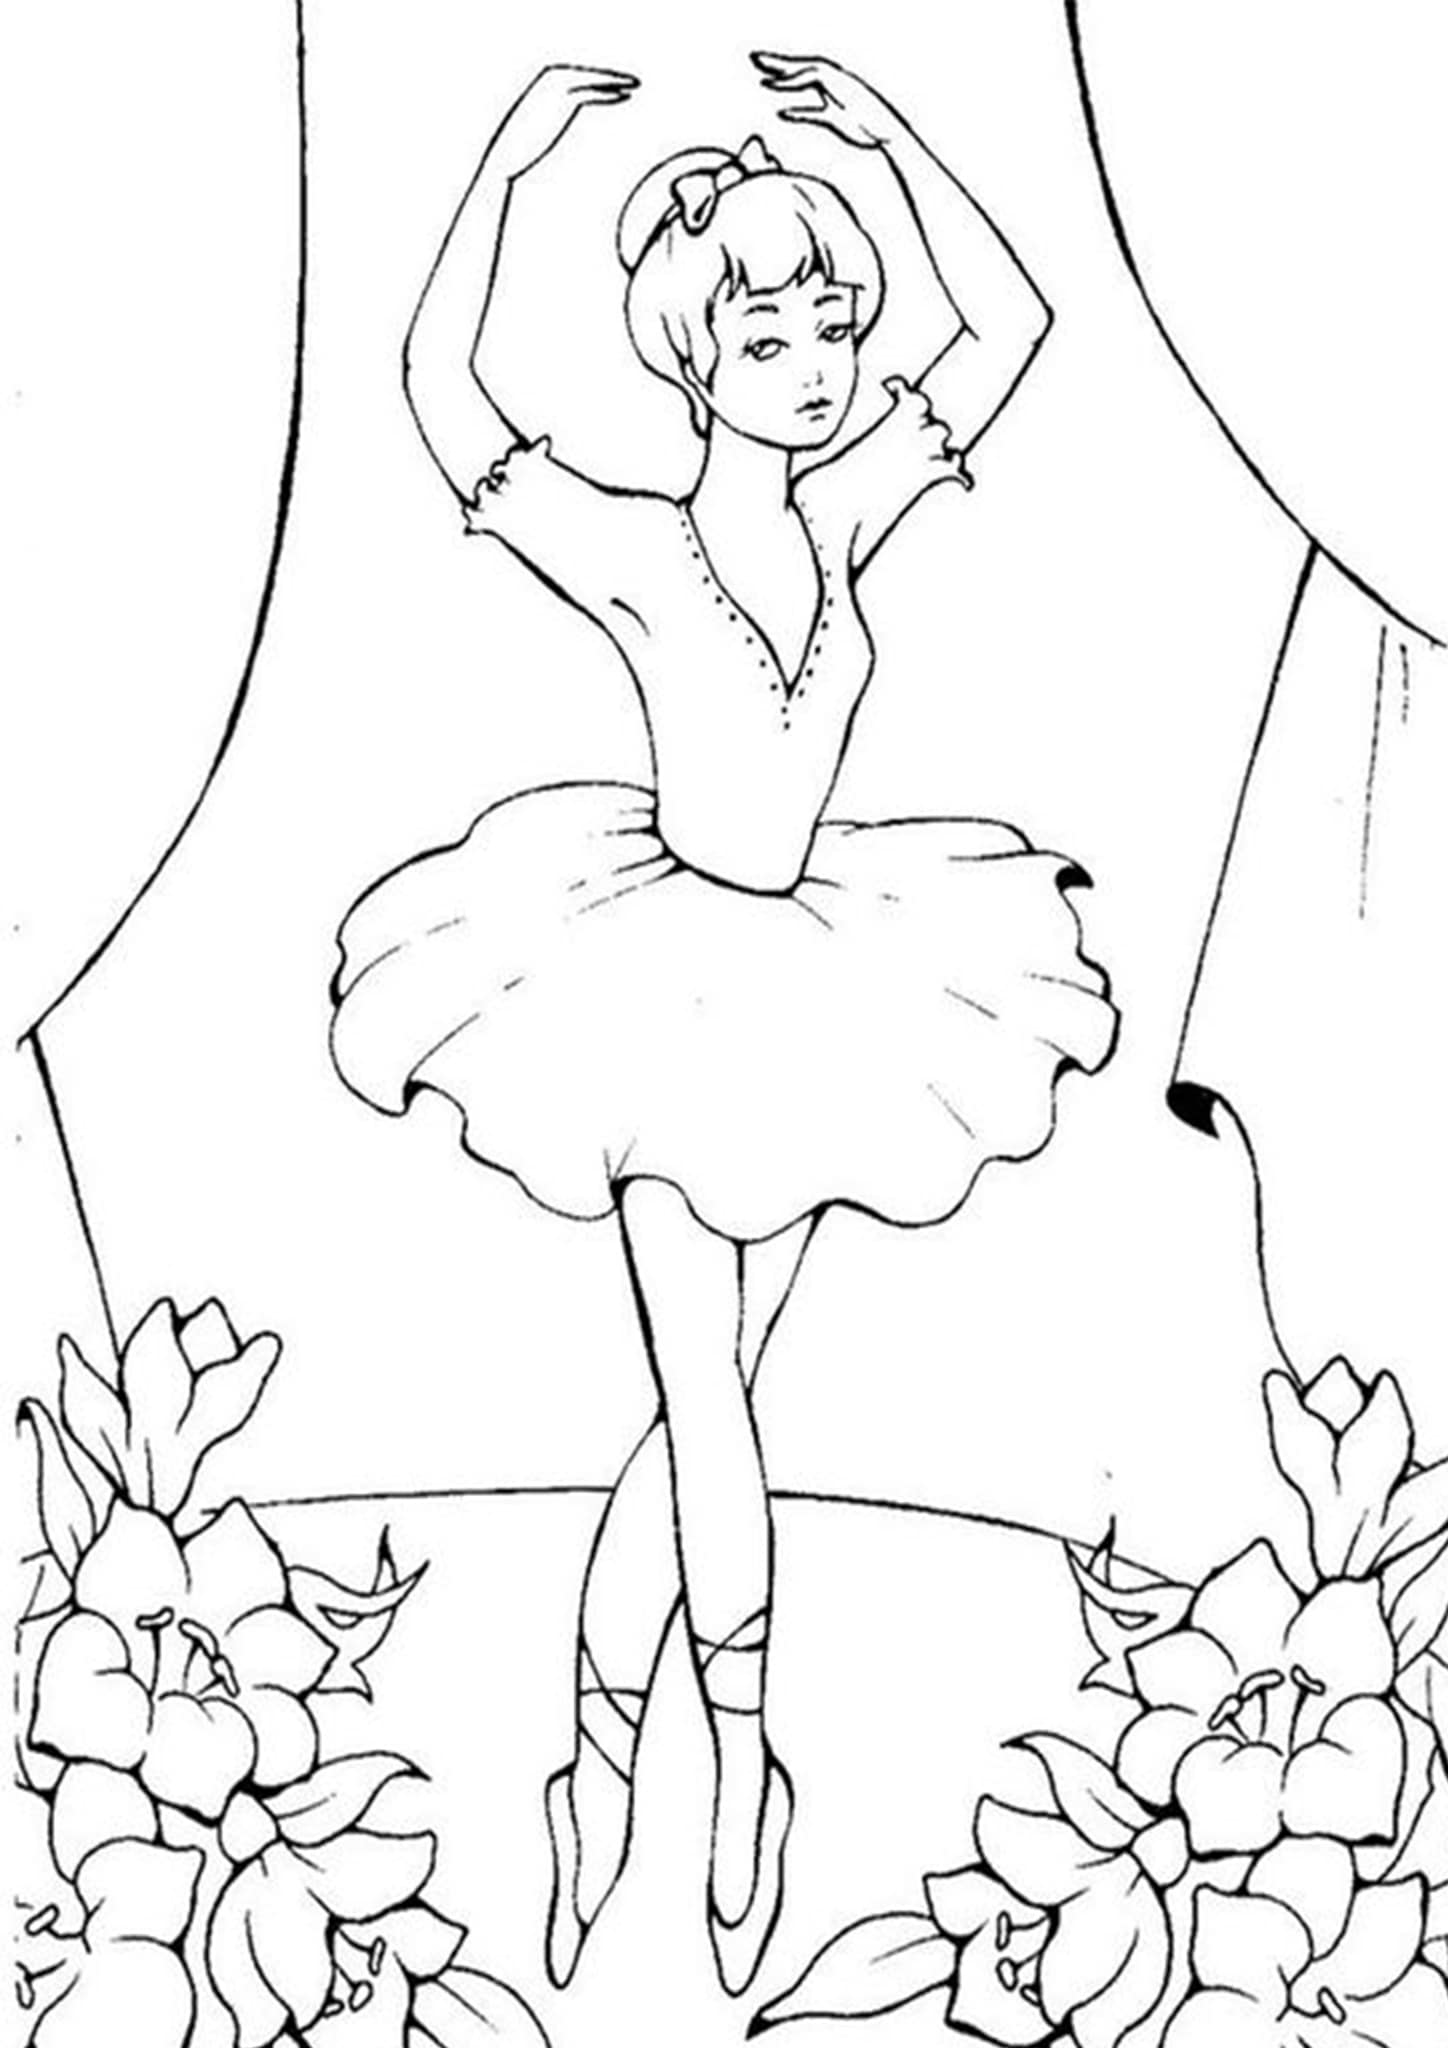 Free & Easy To Print Ballerina Coloring Pages - Tulamama